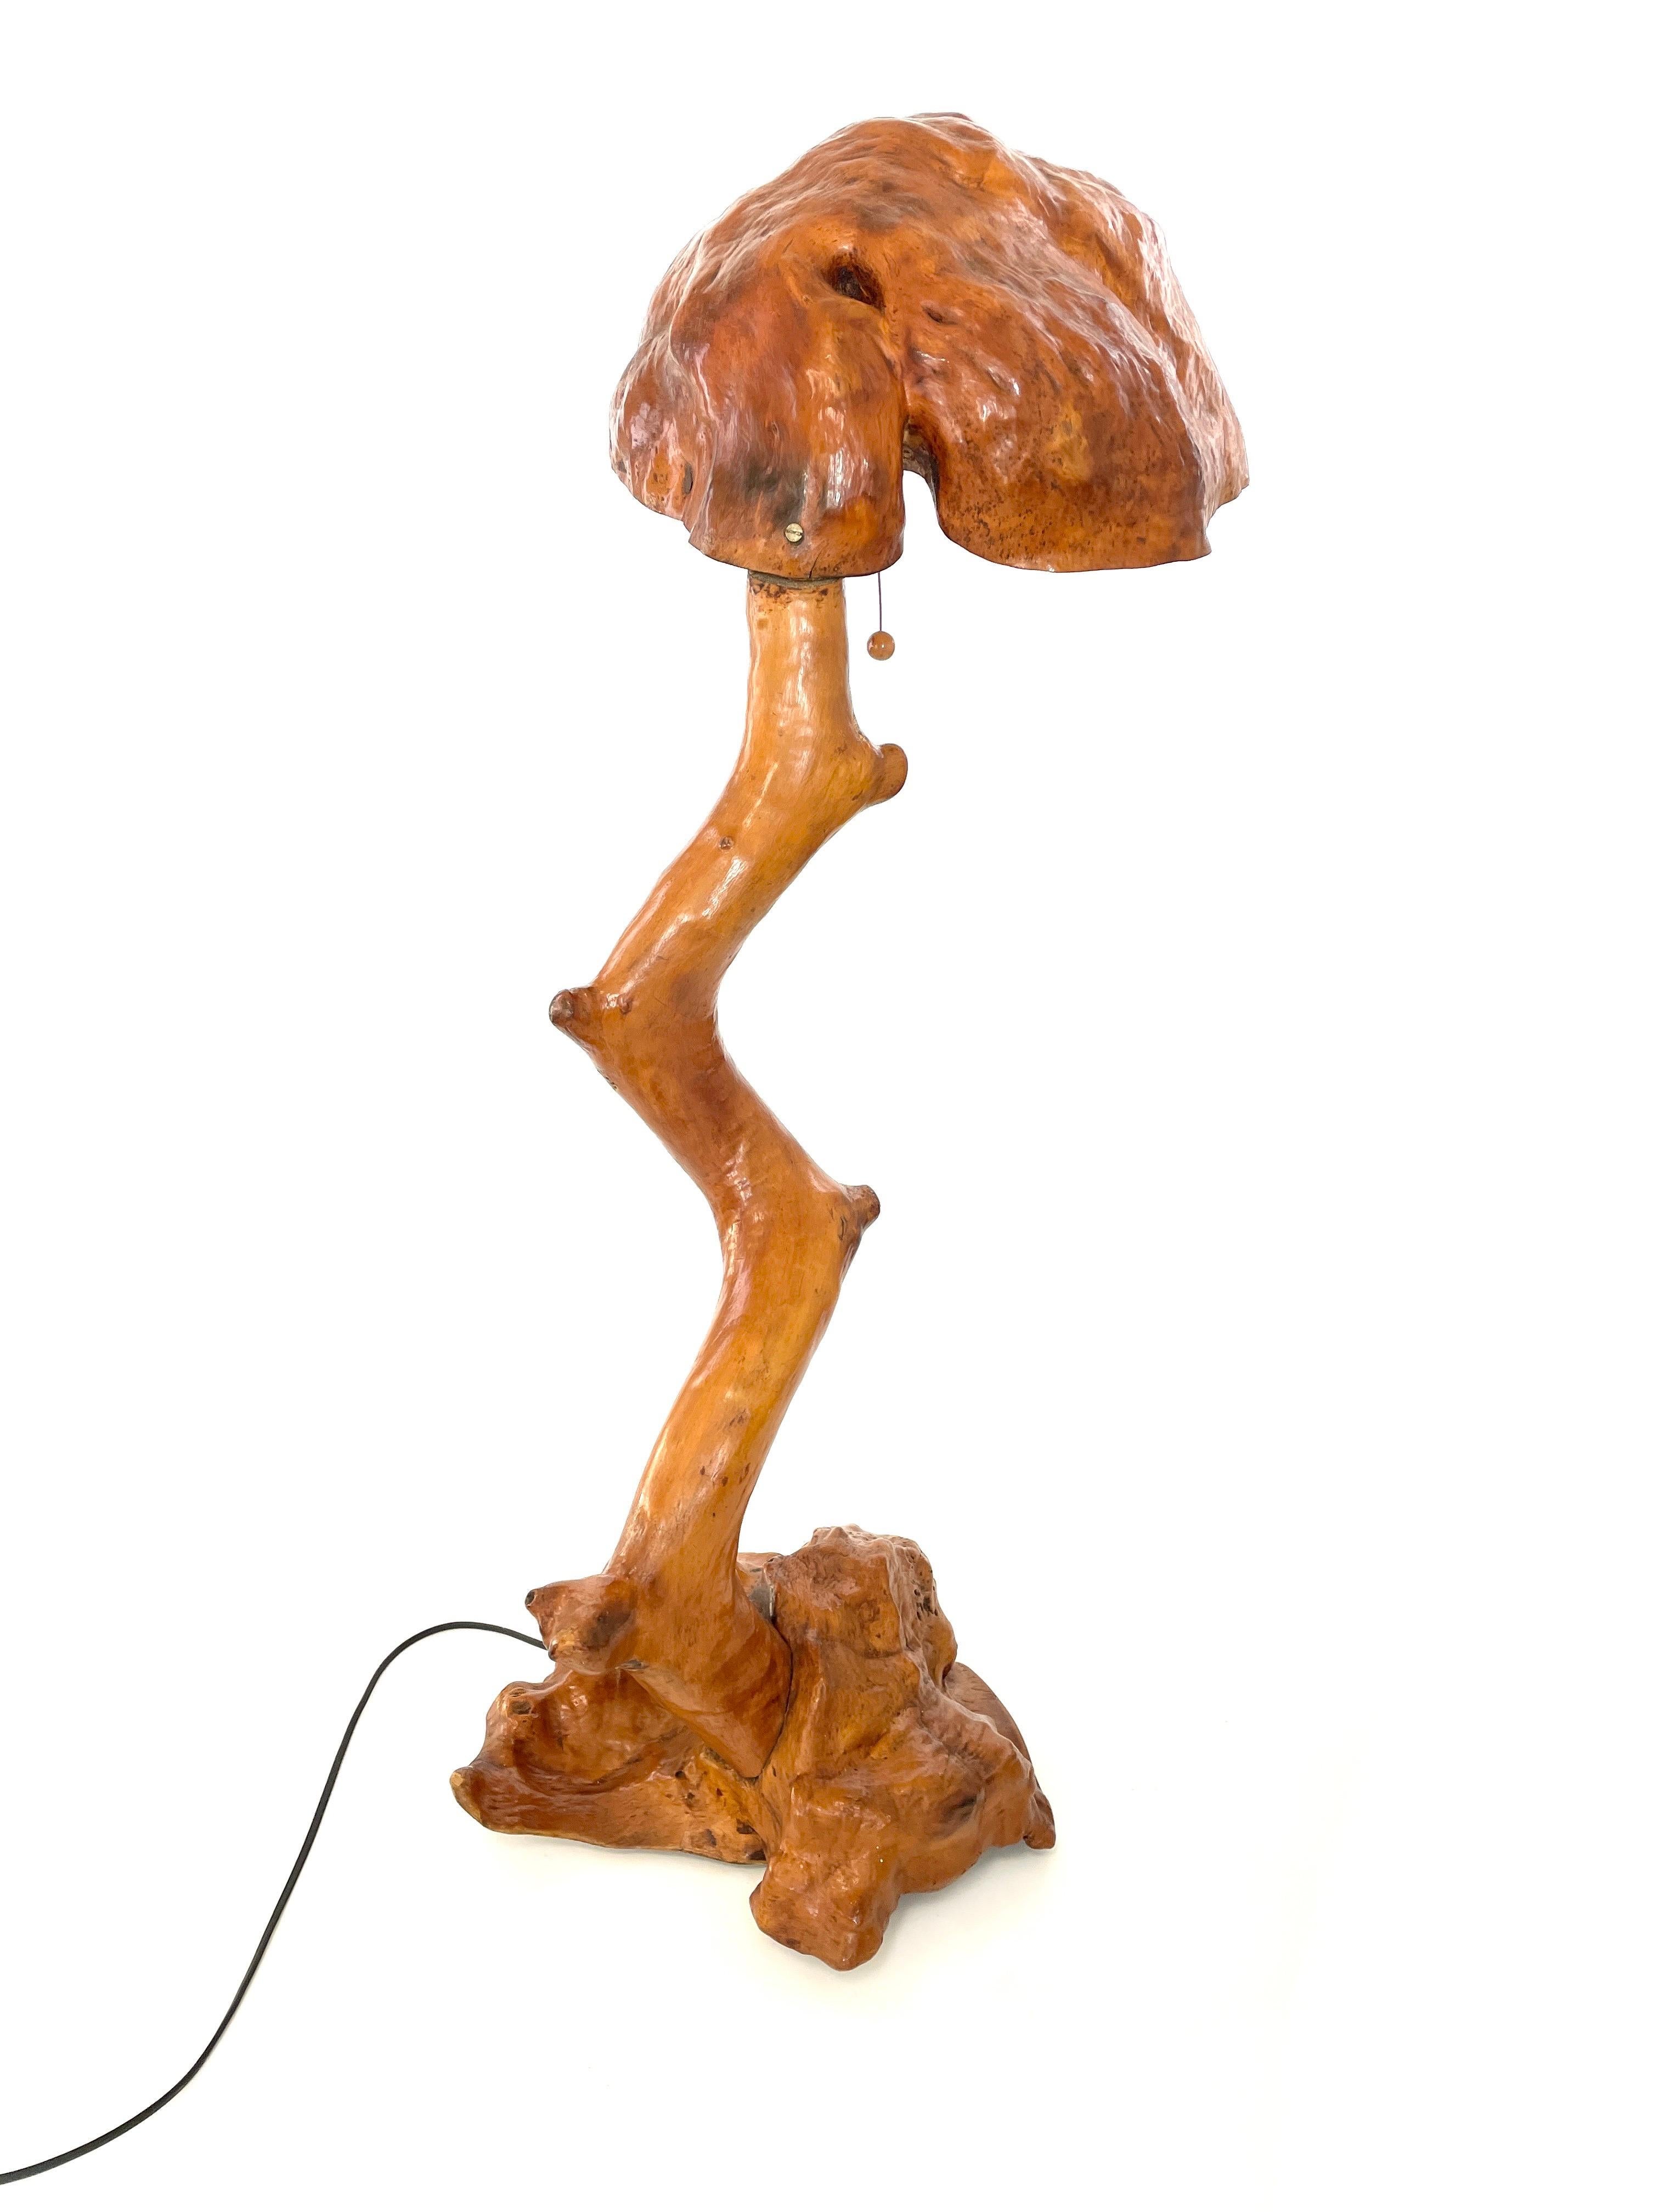 Brutialist Burl Lamp, designed and crafted by an accomplished yet unknown Finnish Artistic Craftsman in the 1930s. This unique lamp embodies the essence of nature, showcasing the rustic natural edge and preserving the organic irregularities and